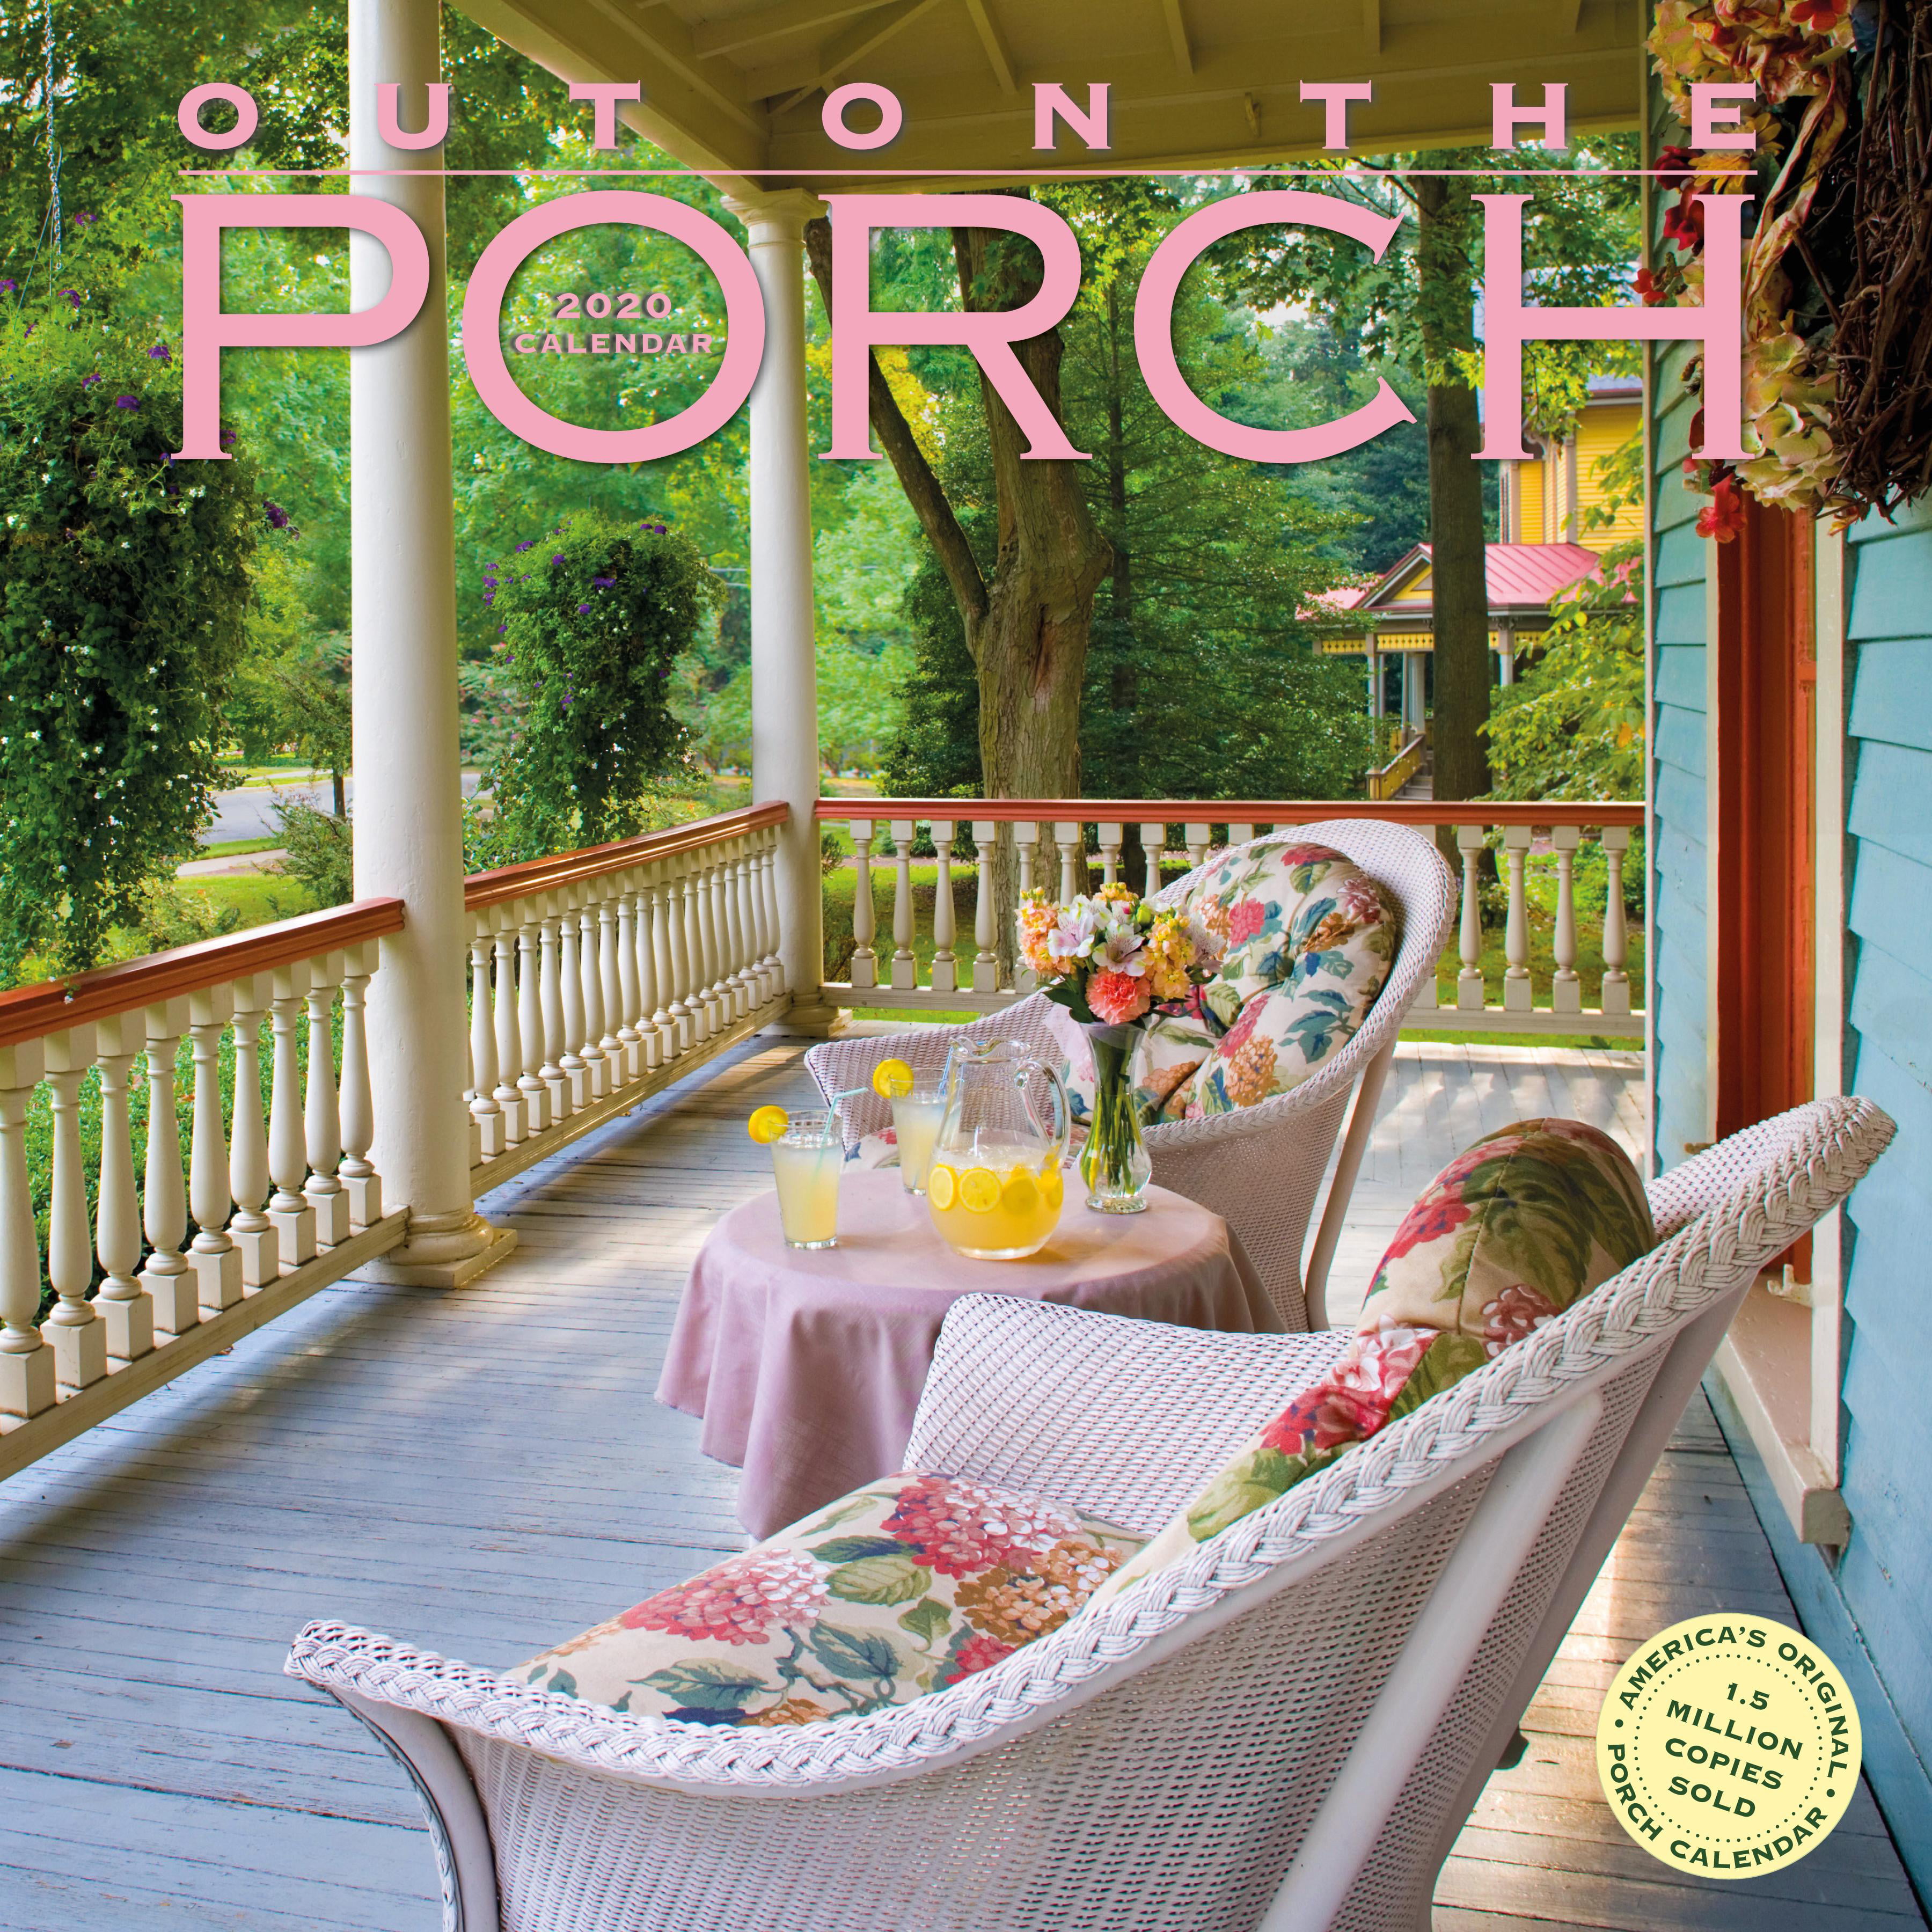 out-on-the-porch-wall-calendar-2020-other-walmart